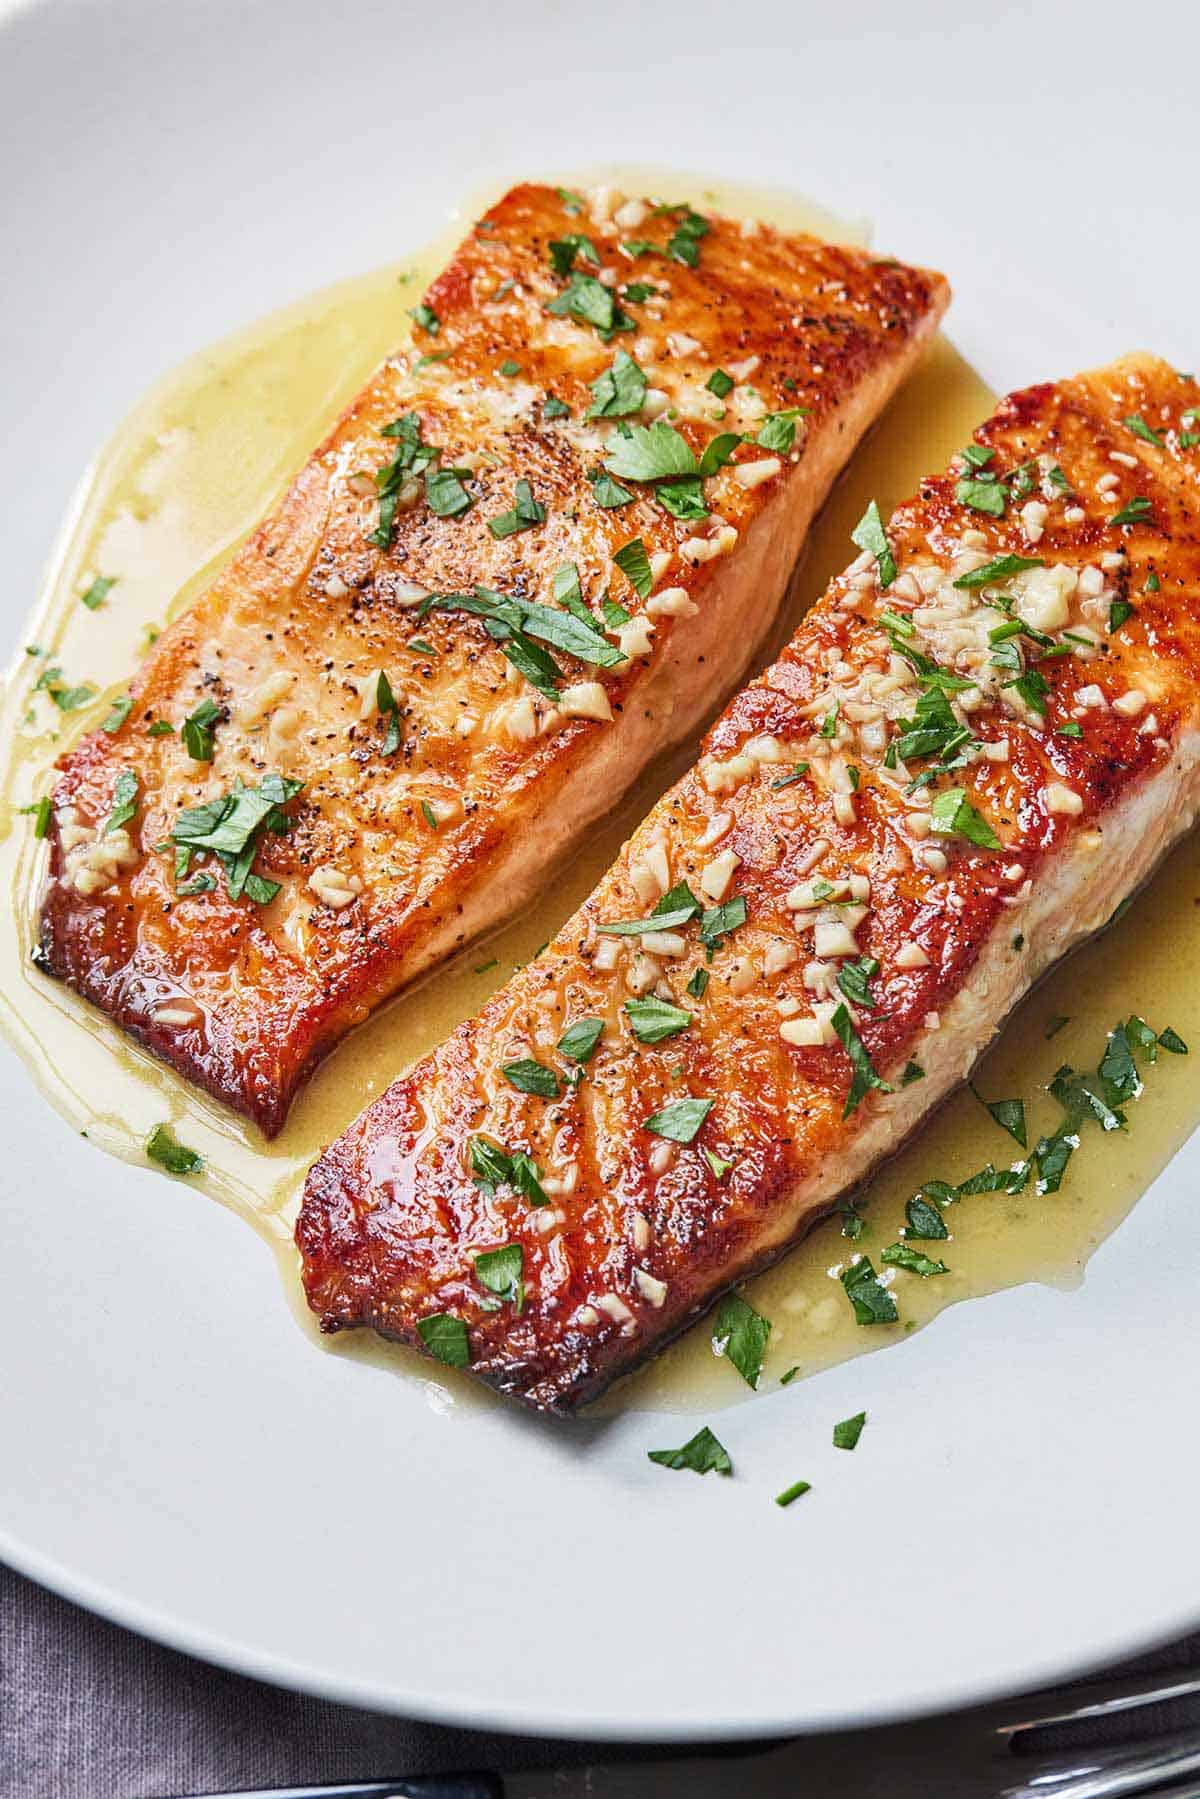 Two pan seared salmon fillets in a plate with a butter sauce poured over top of them. The top of the fillets have minced garlic and chopped parsley.